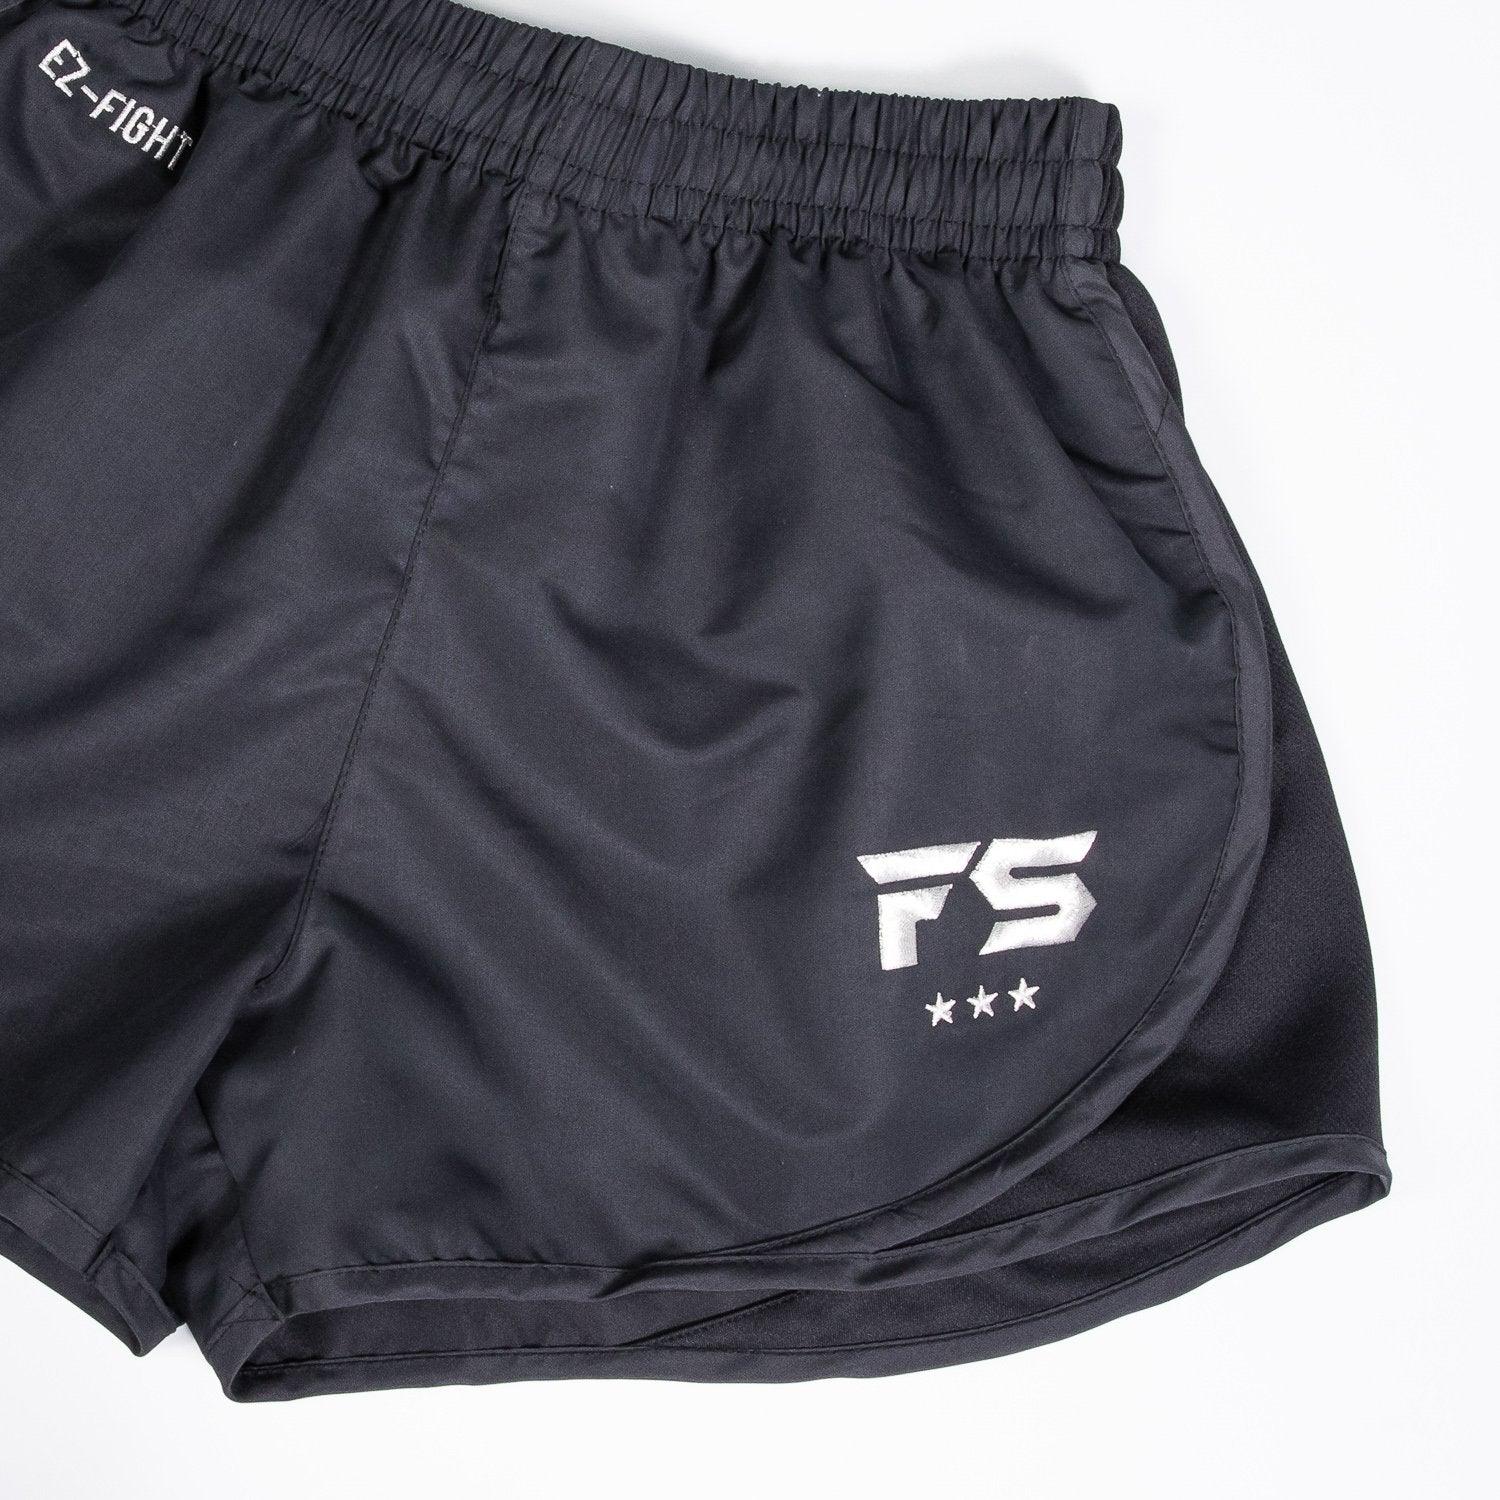 EZ-Fight Shorts - BLACK - InFightStyle Canada 